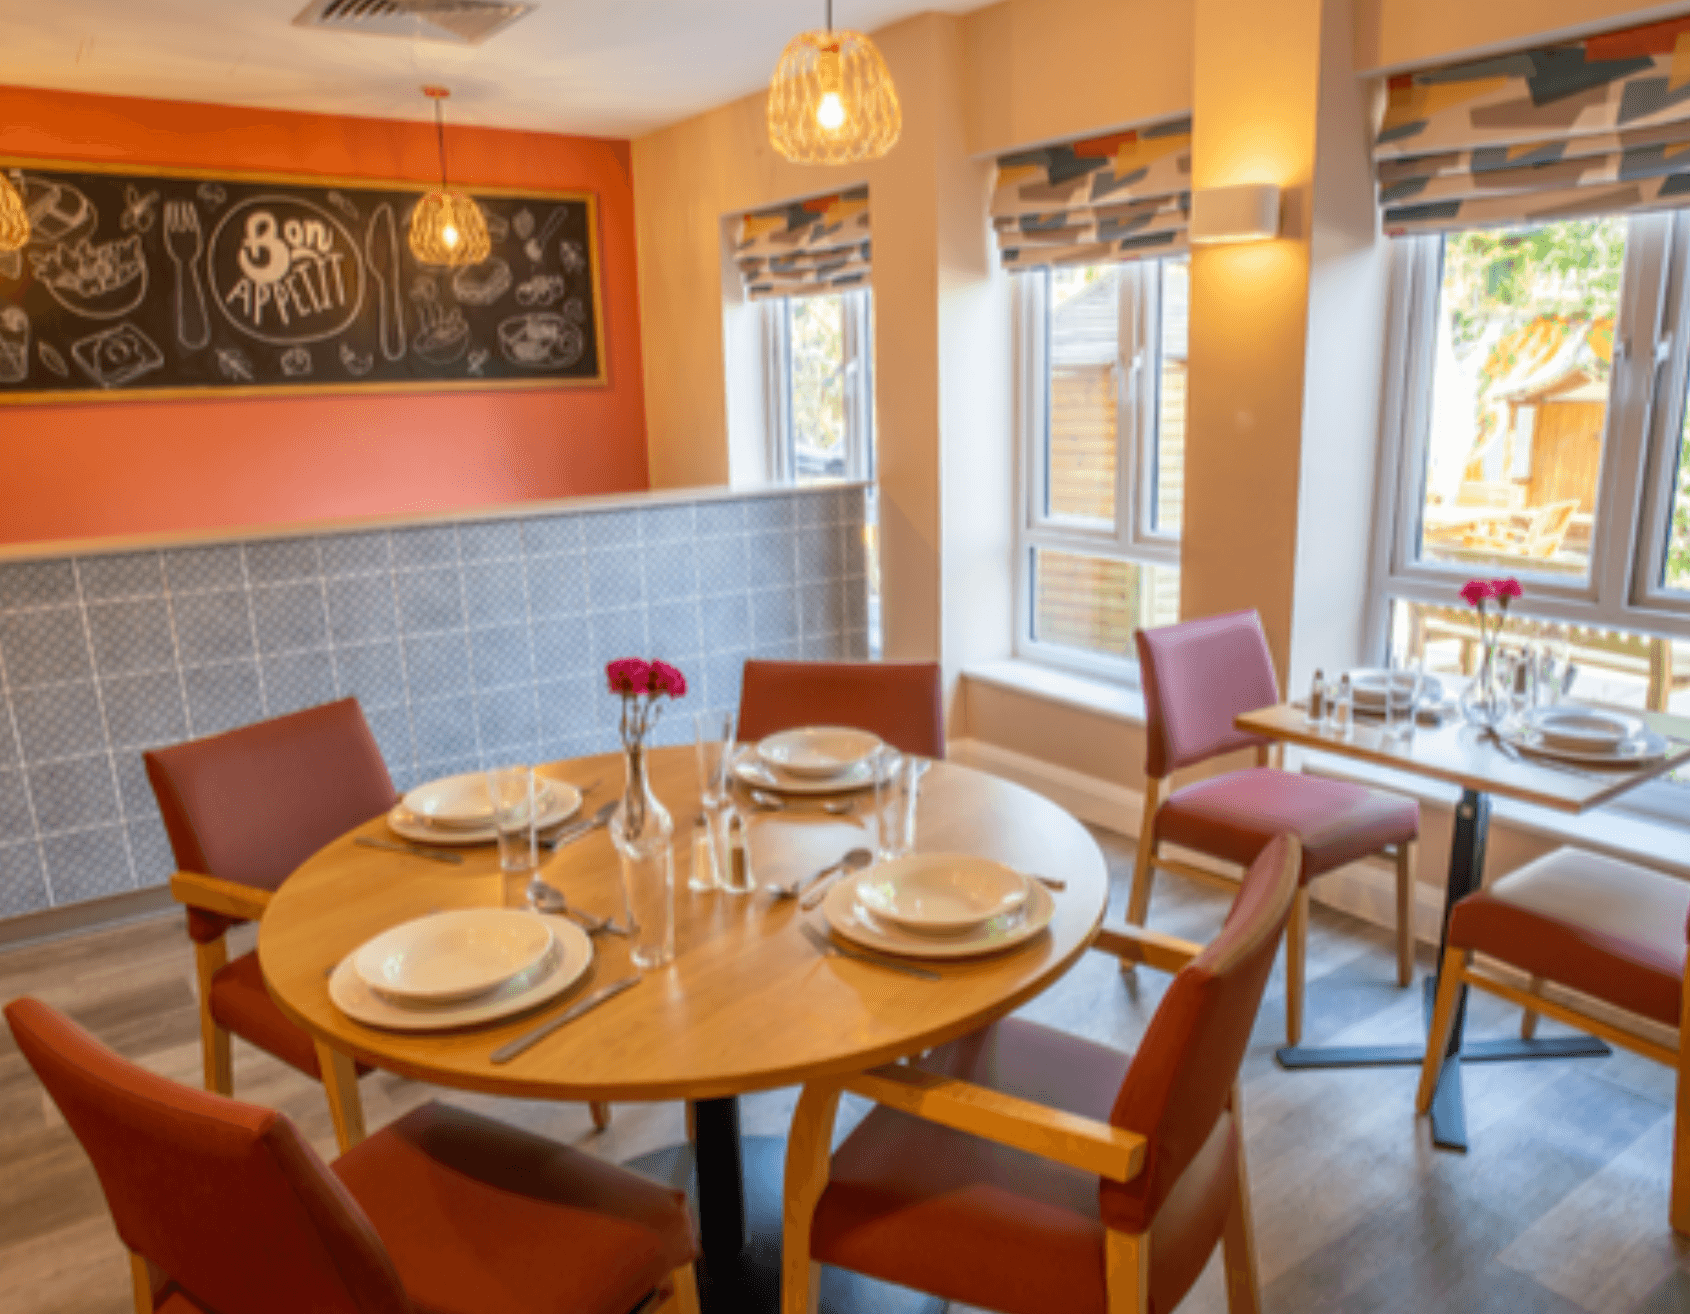 Dining room of Haverlock Court care home in Stockwell, London